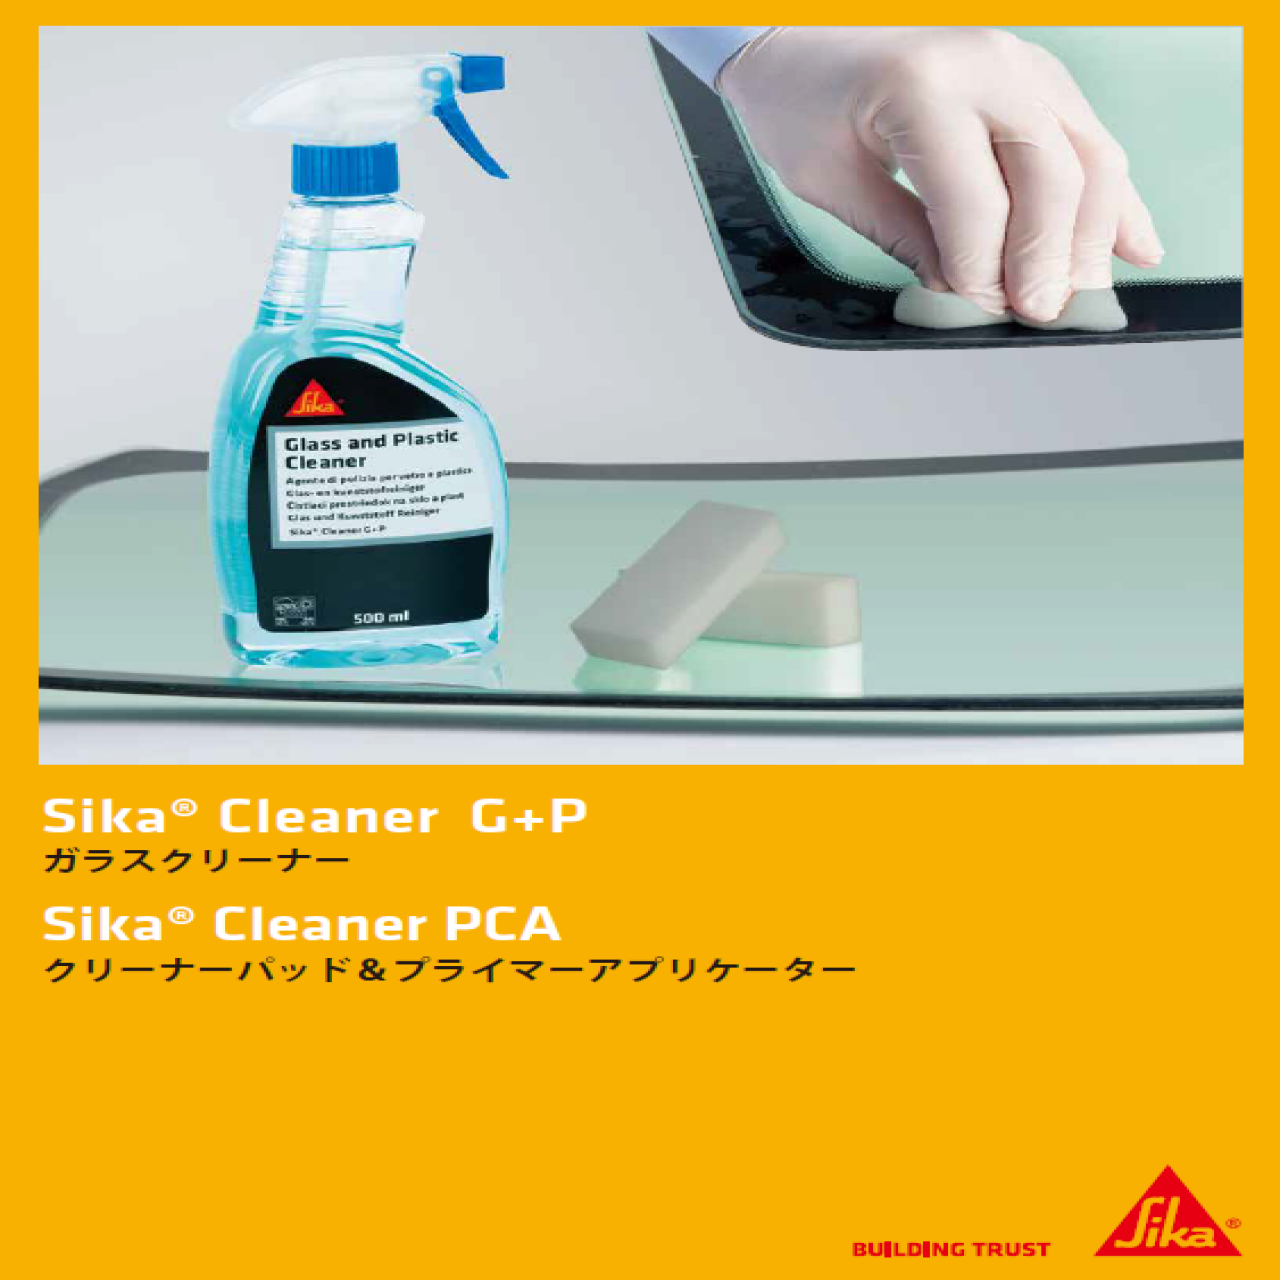 Sika Cleaner G+P & Sika Cleaner PCA